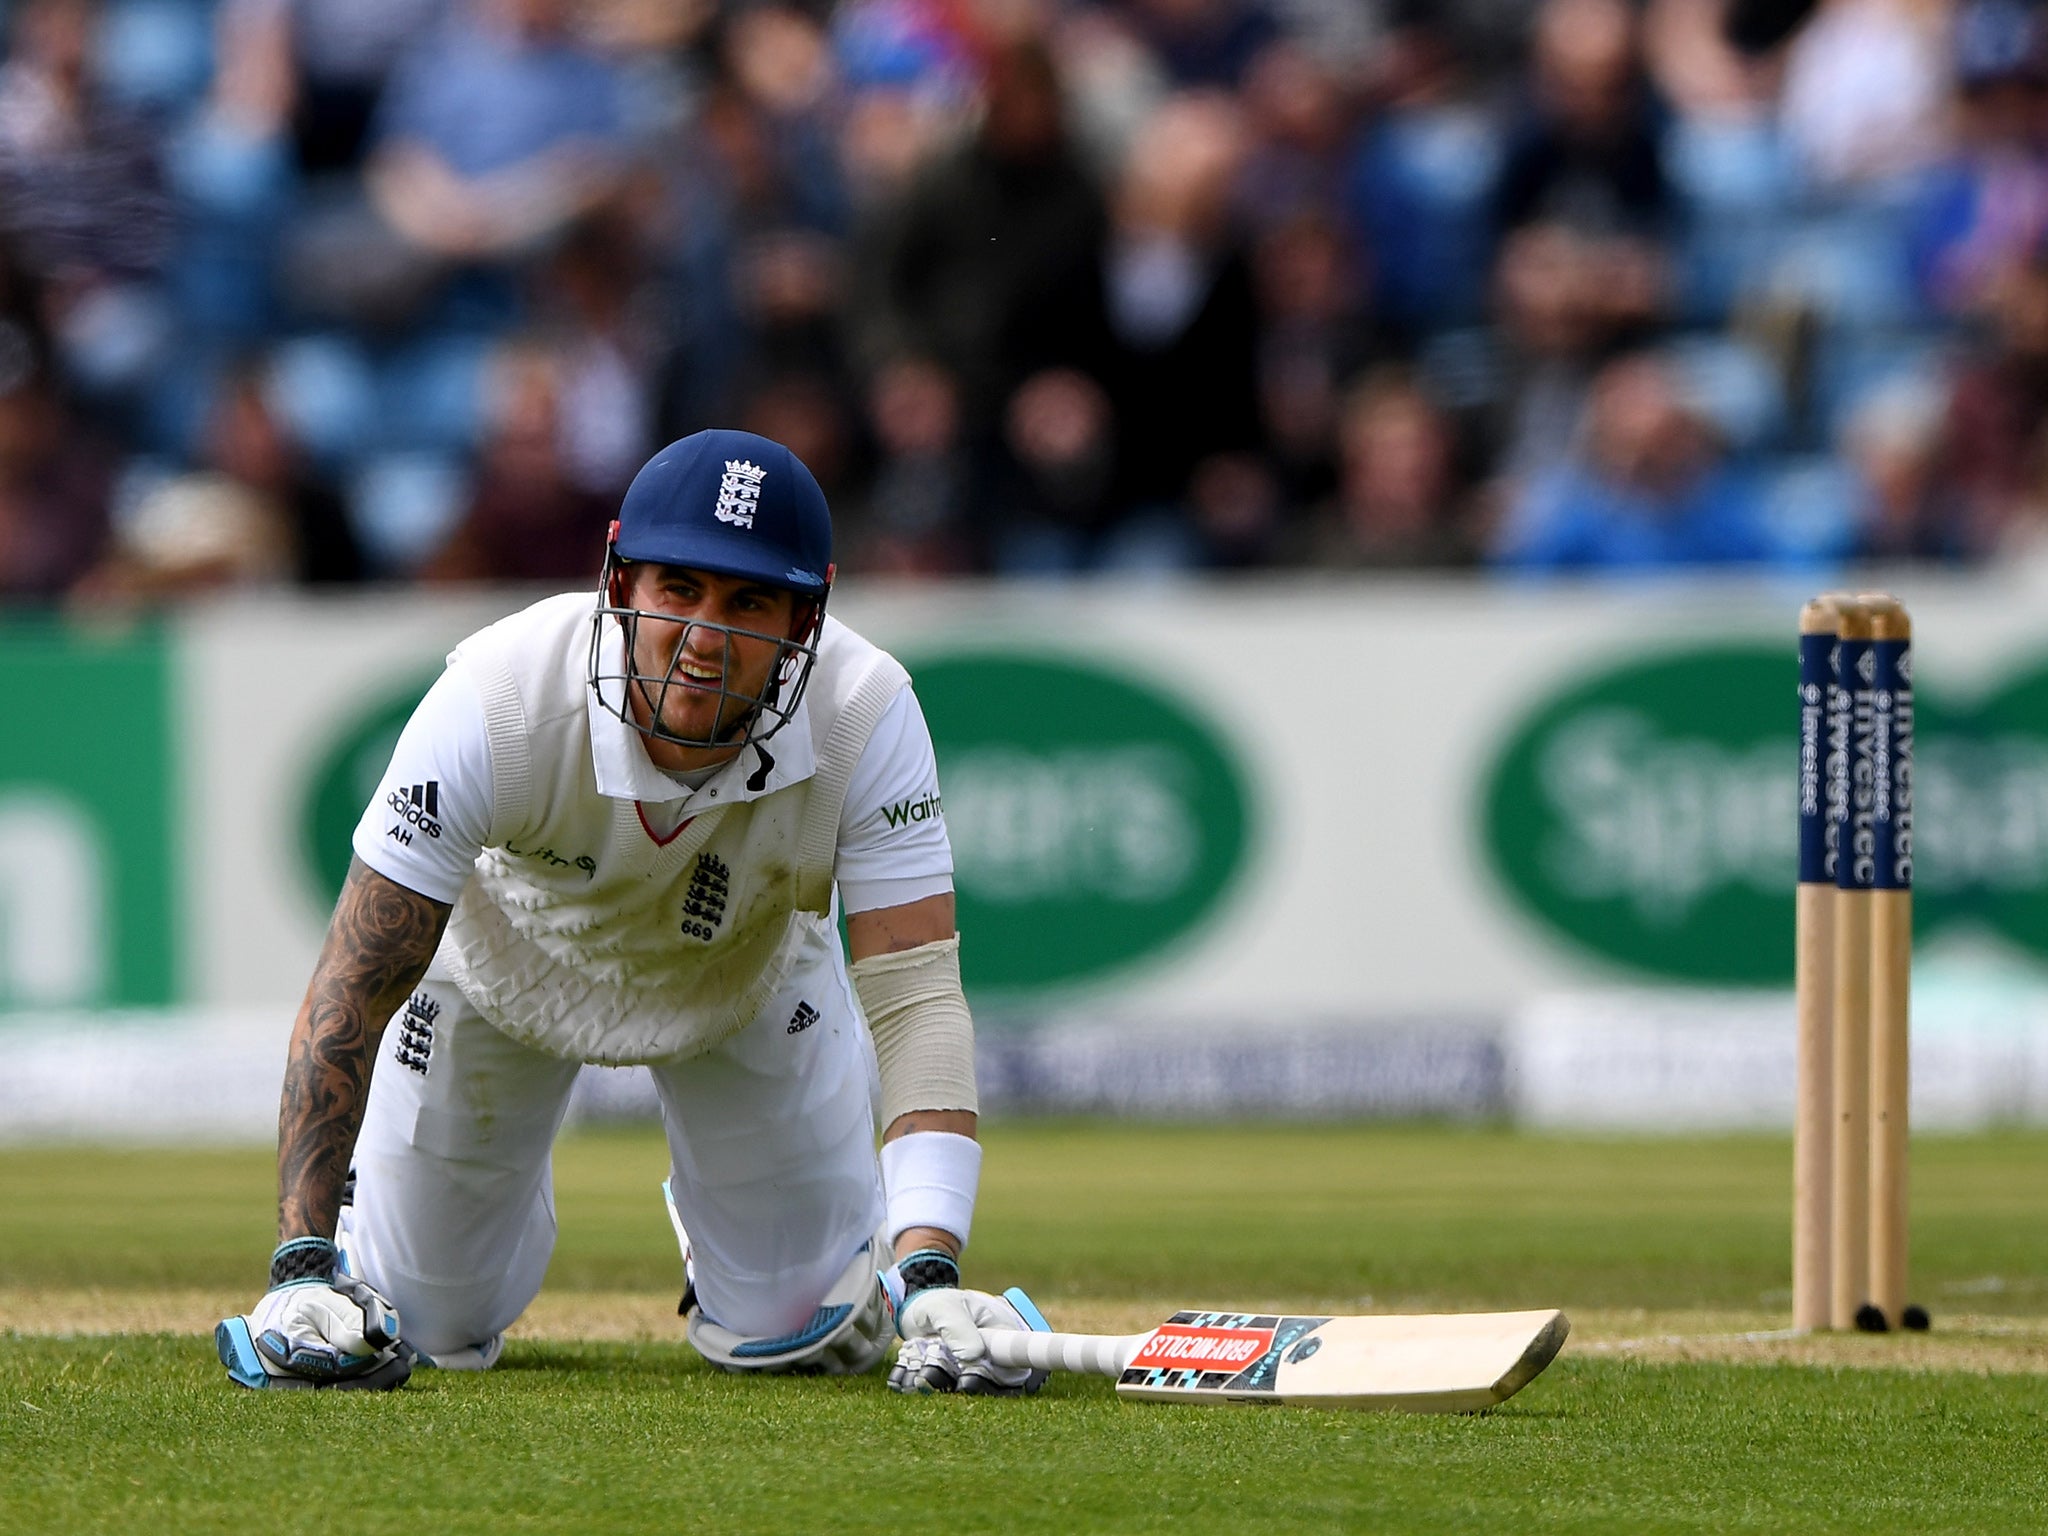 Hales could yet be the long-term opening partner for captain Alastair Cook